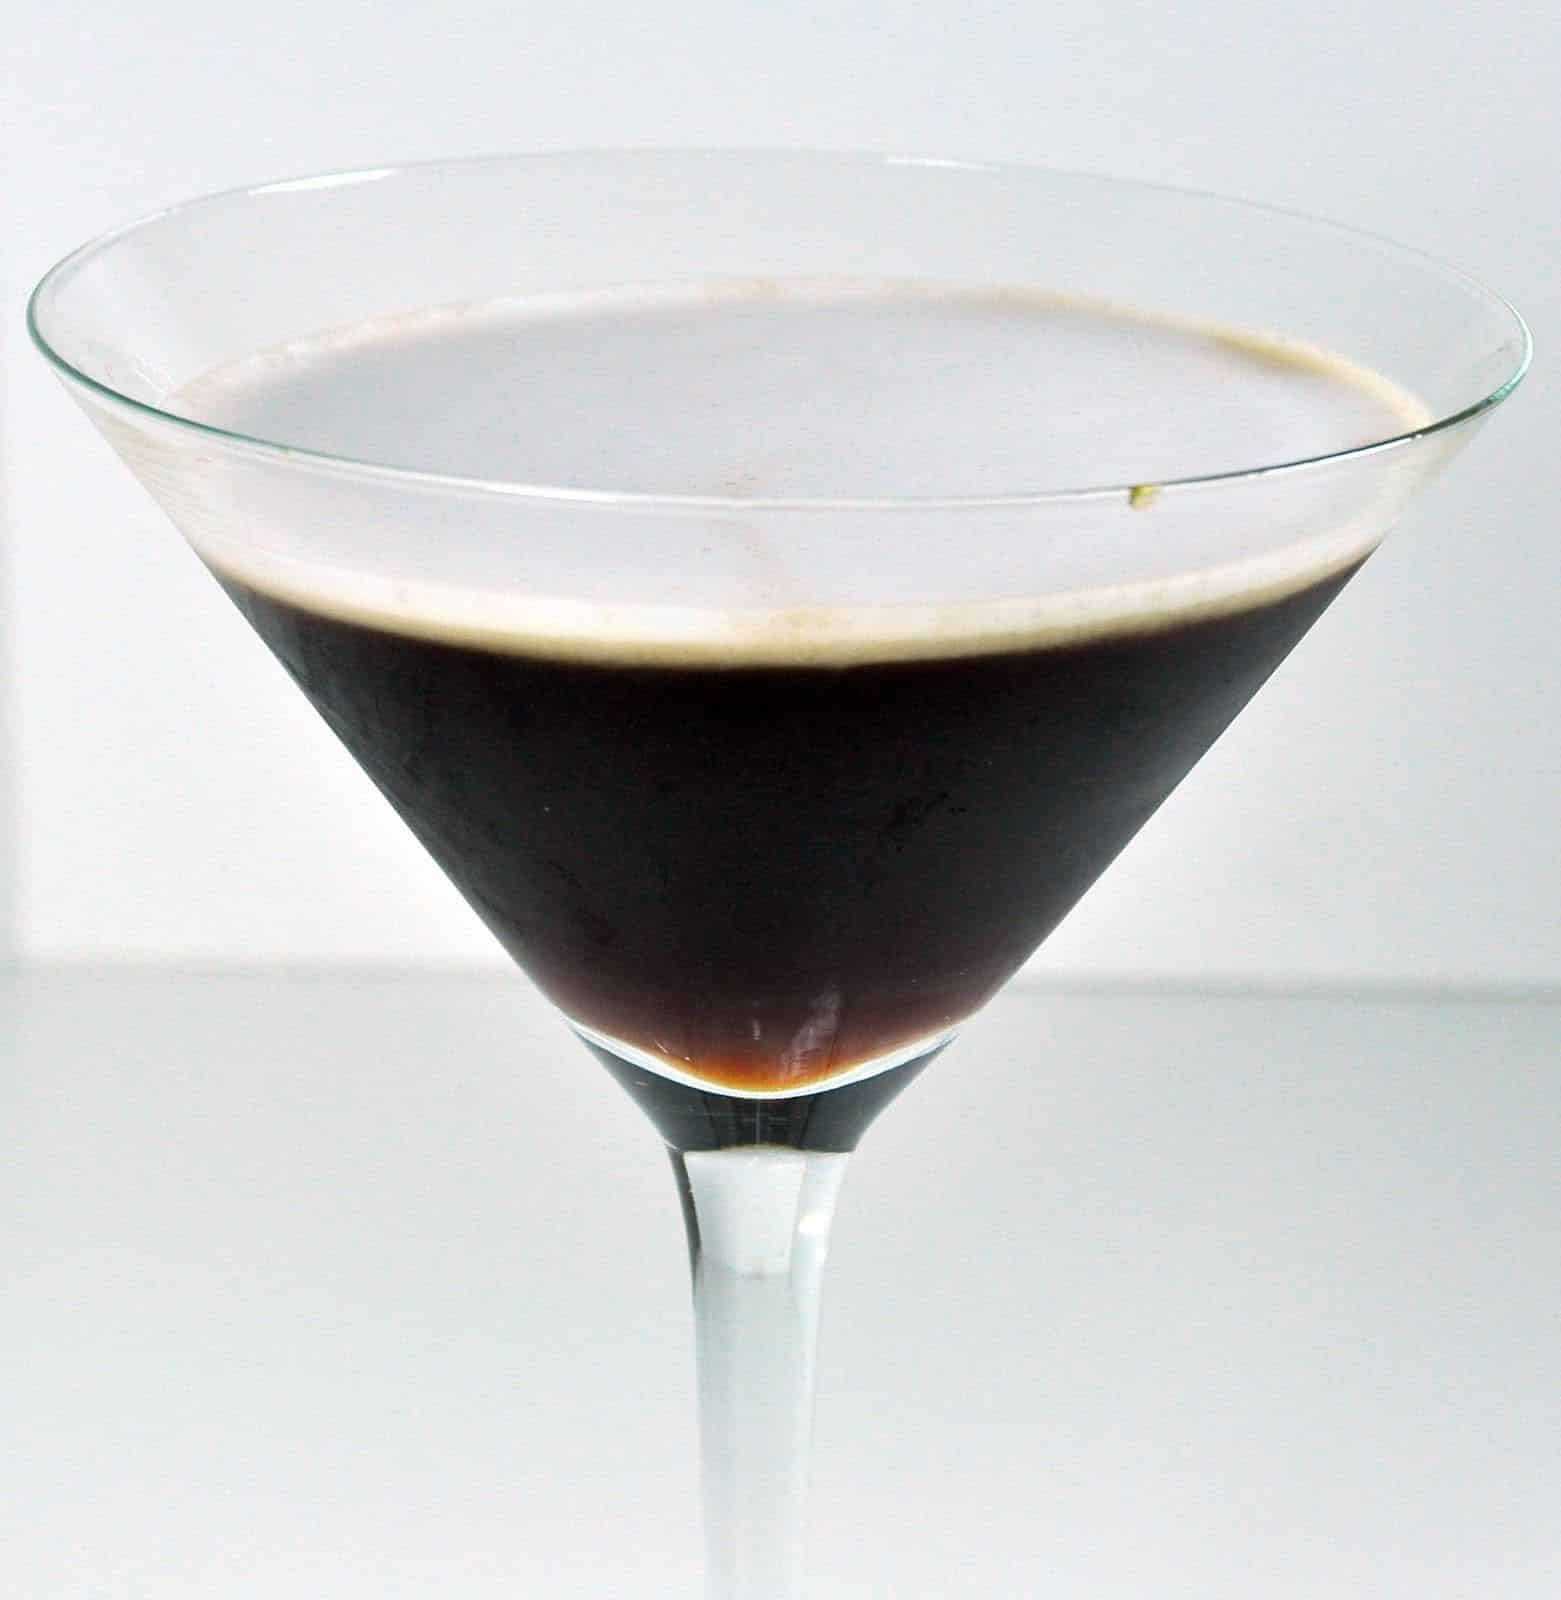 Our Espresso Martini cocktail (see how it